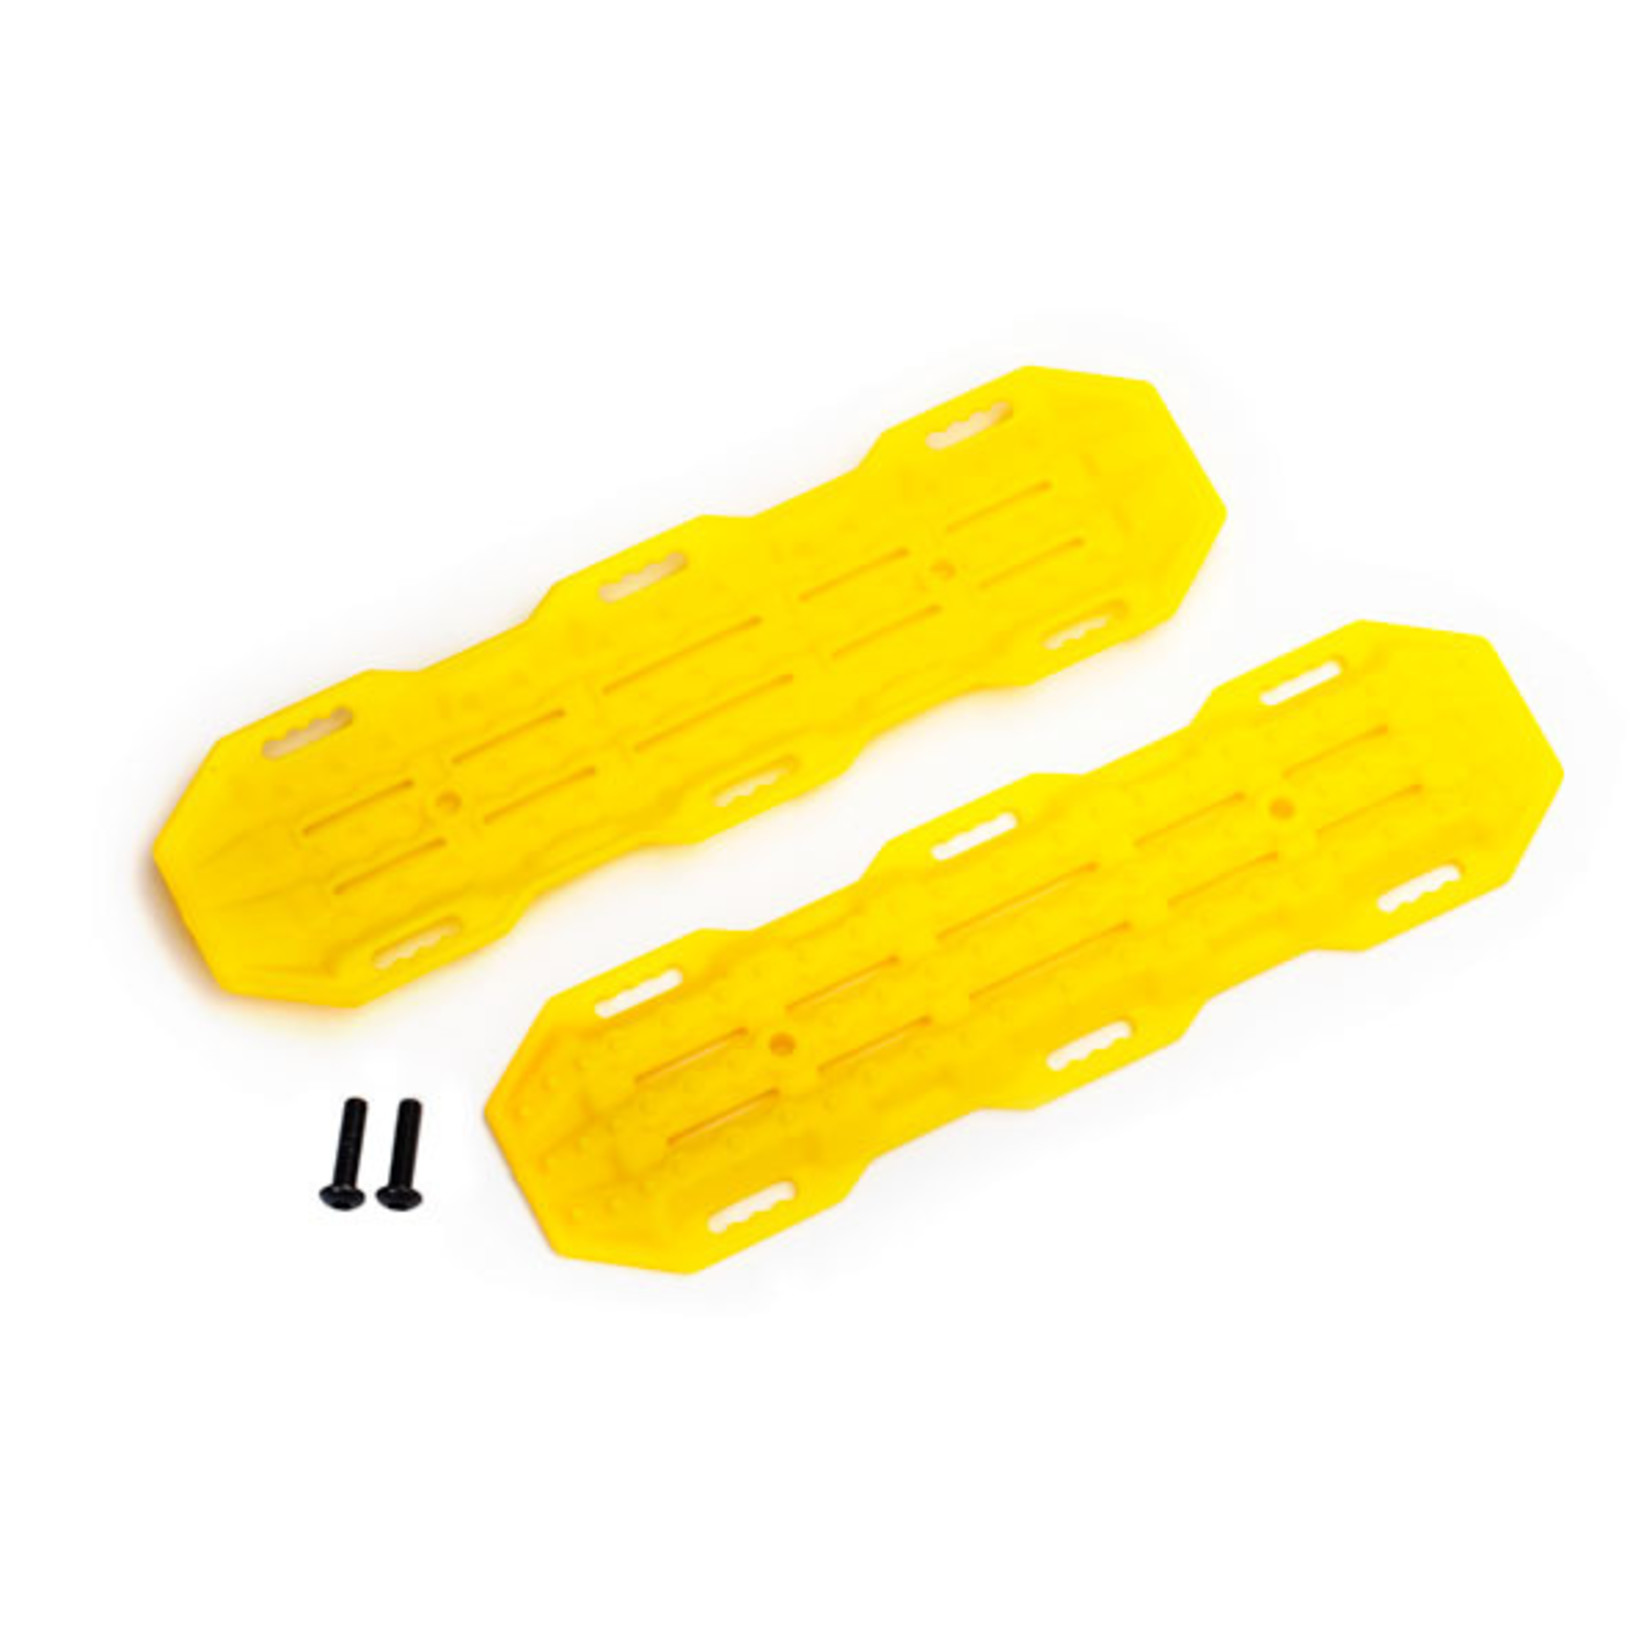 Traxxas 8121A - Traction boards, yellow/ mounting hardware